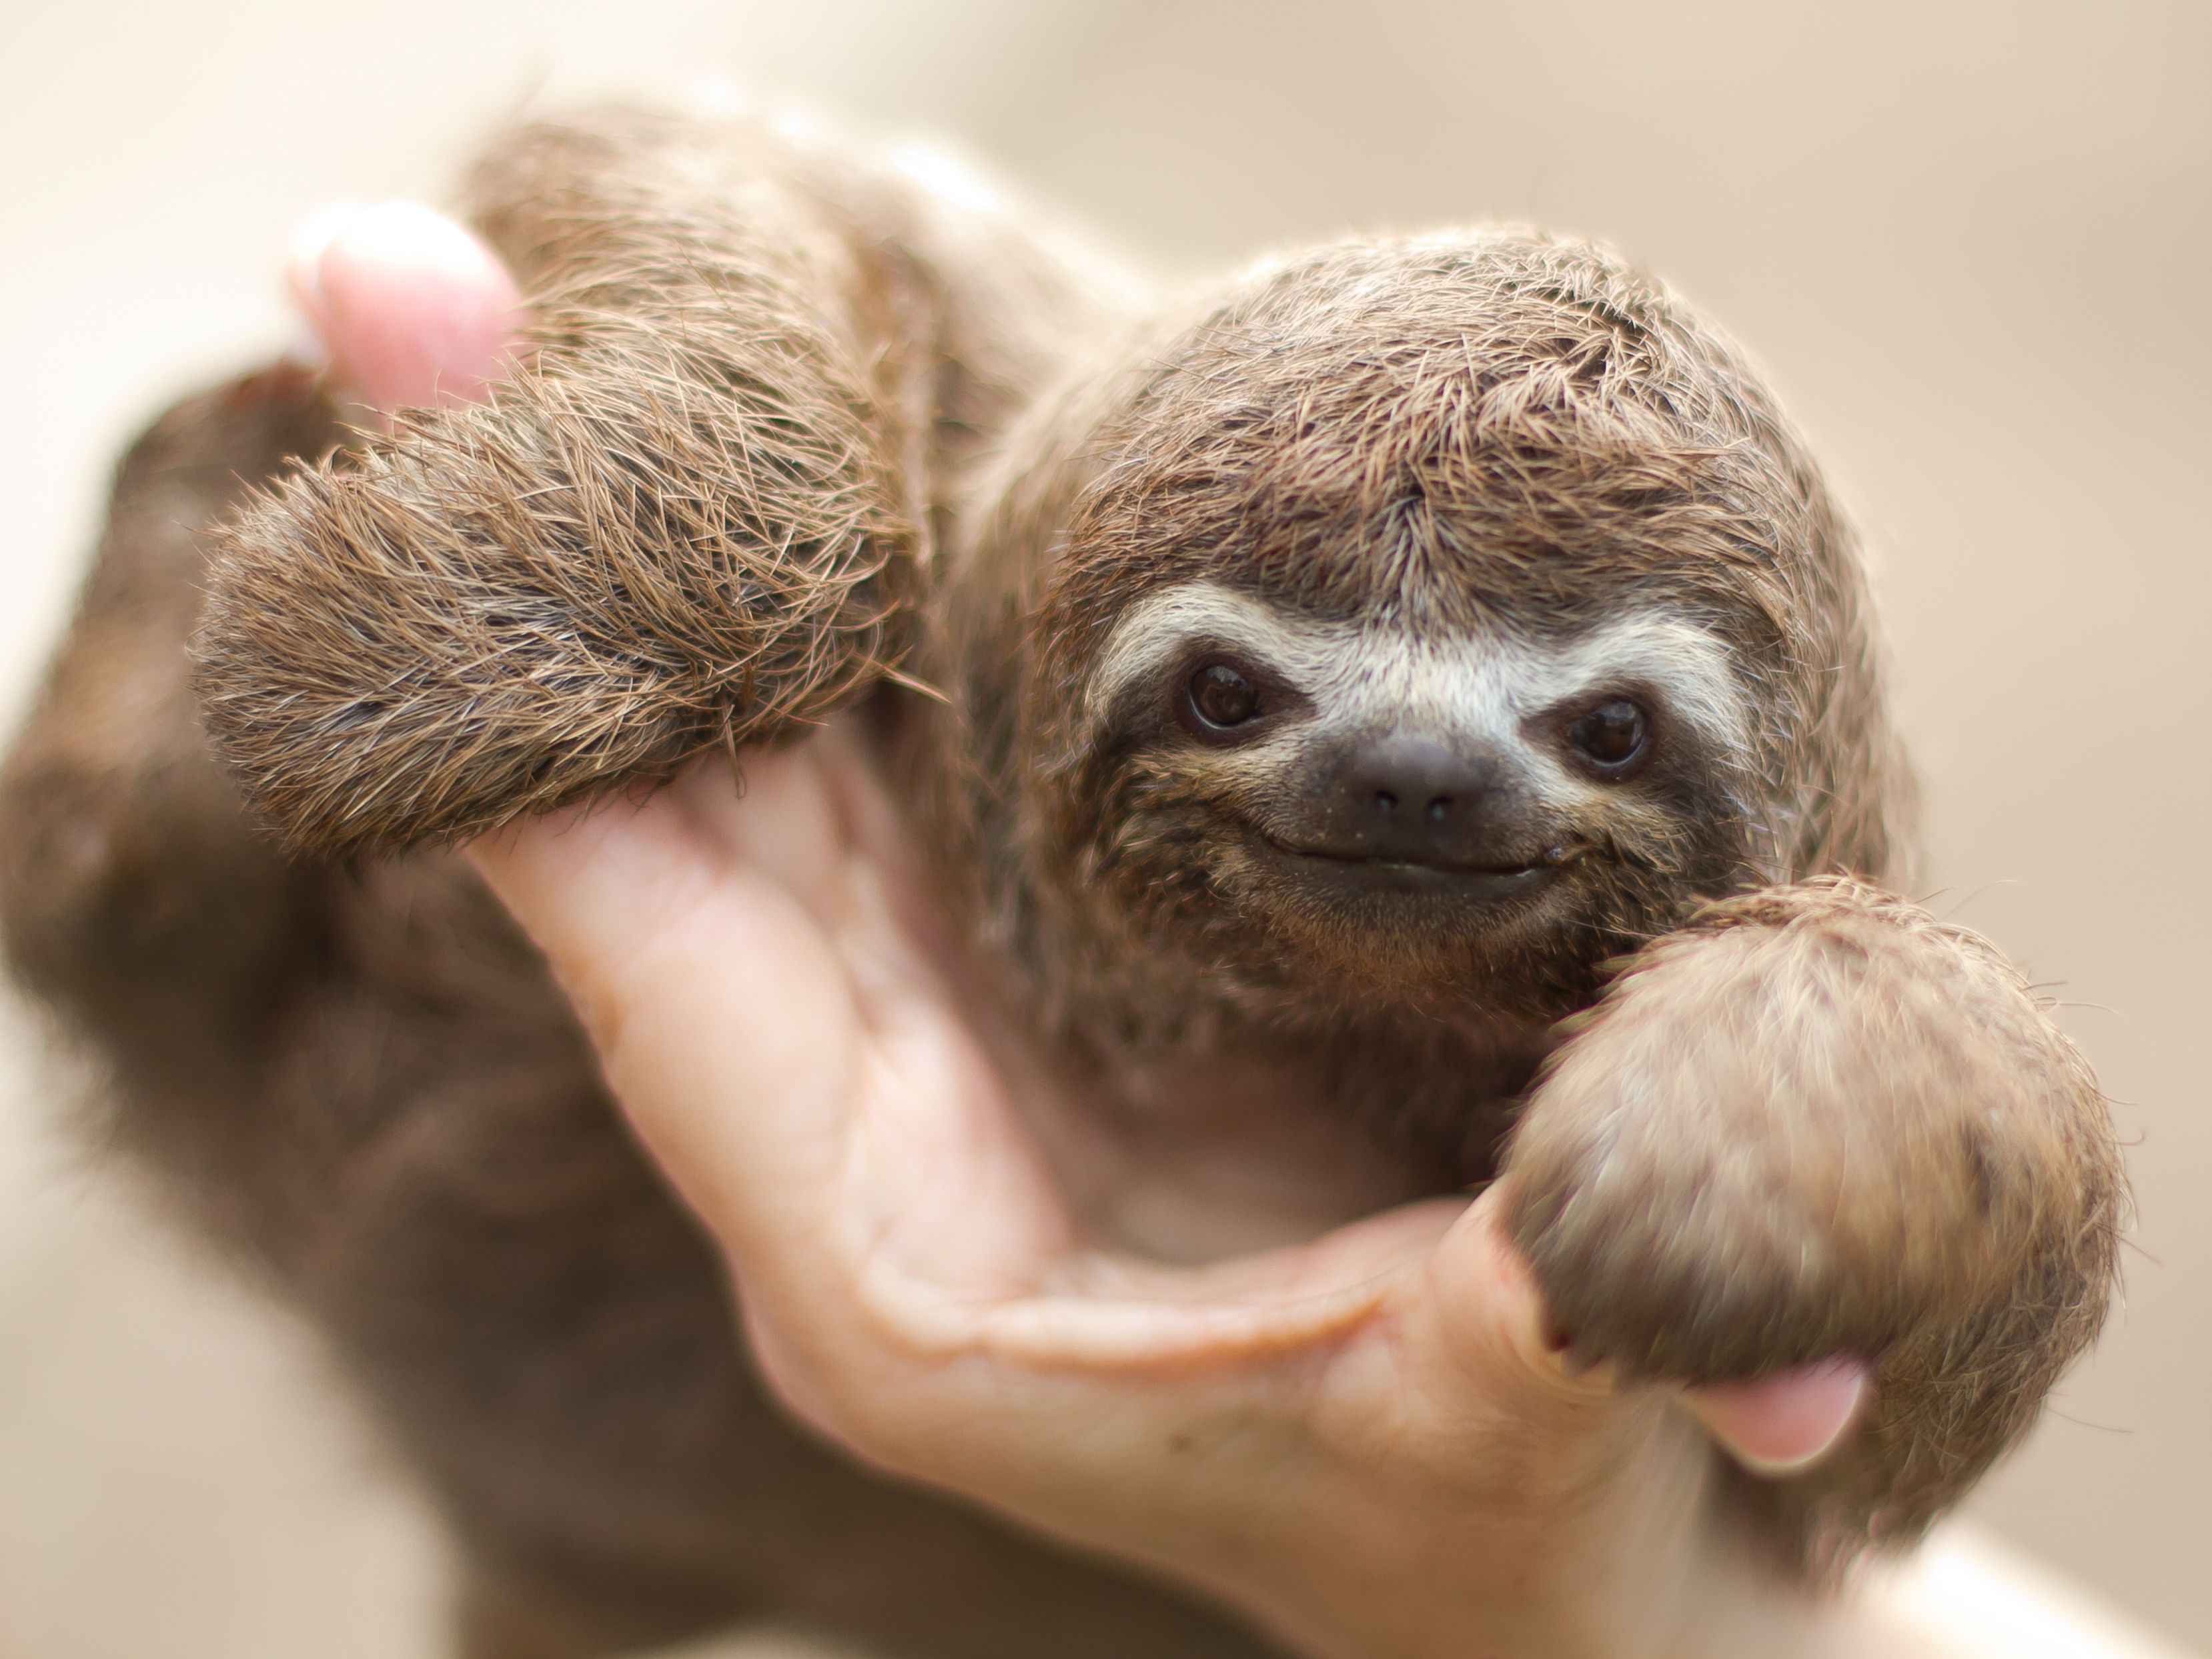 Are sloths easy to take care of?